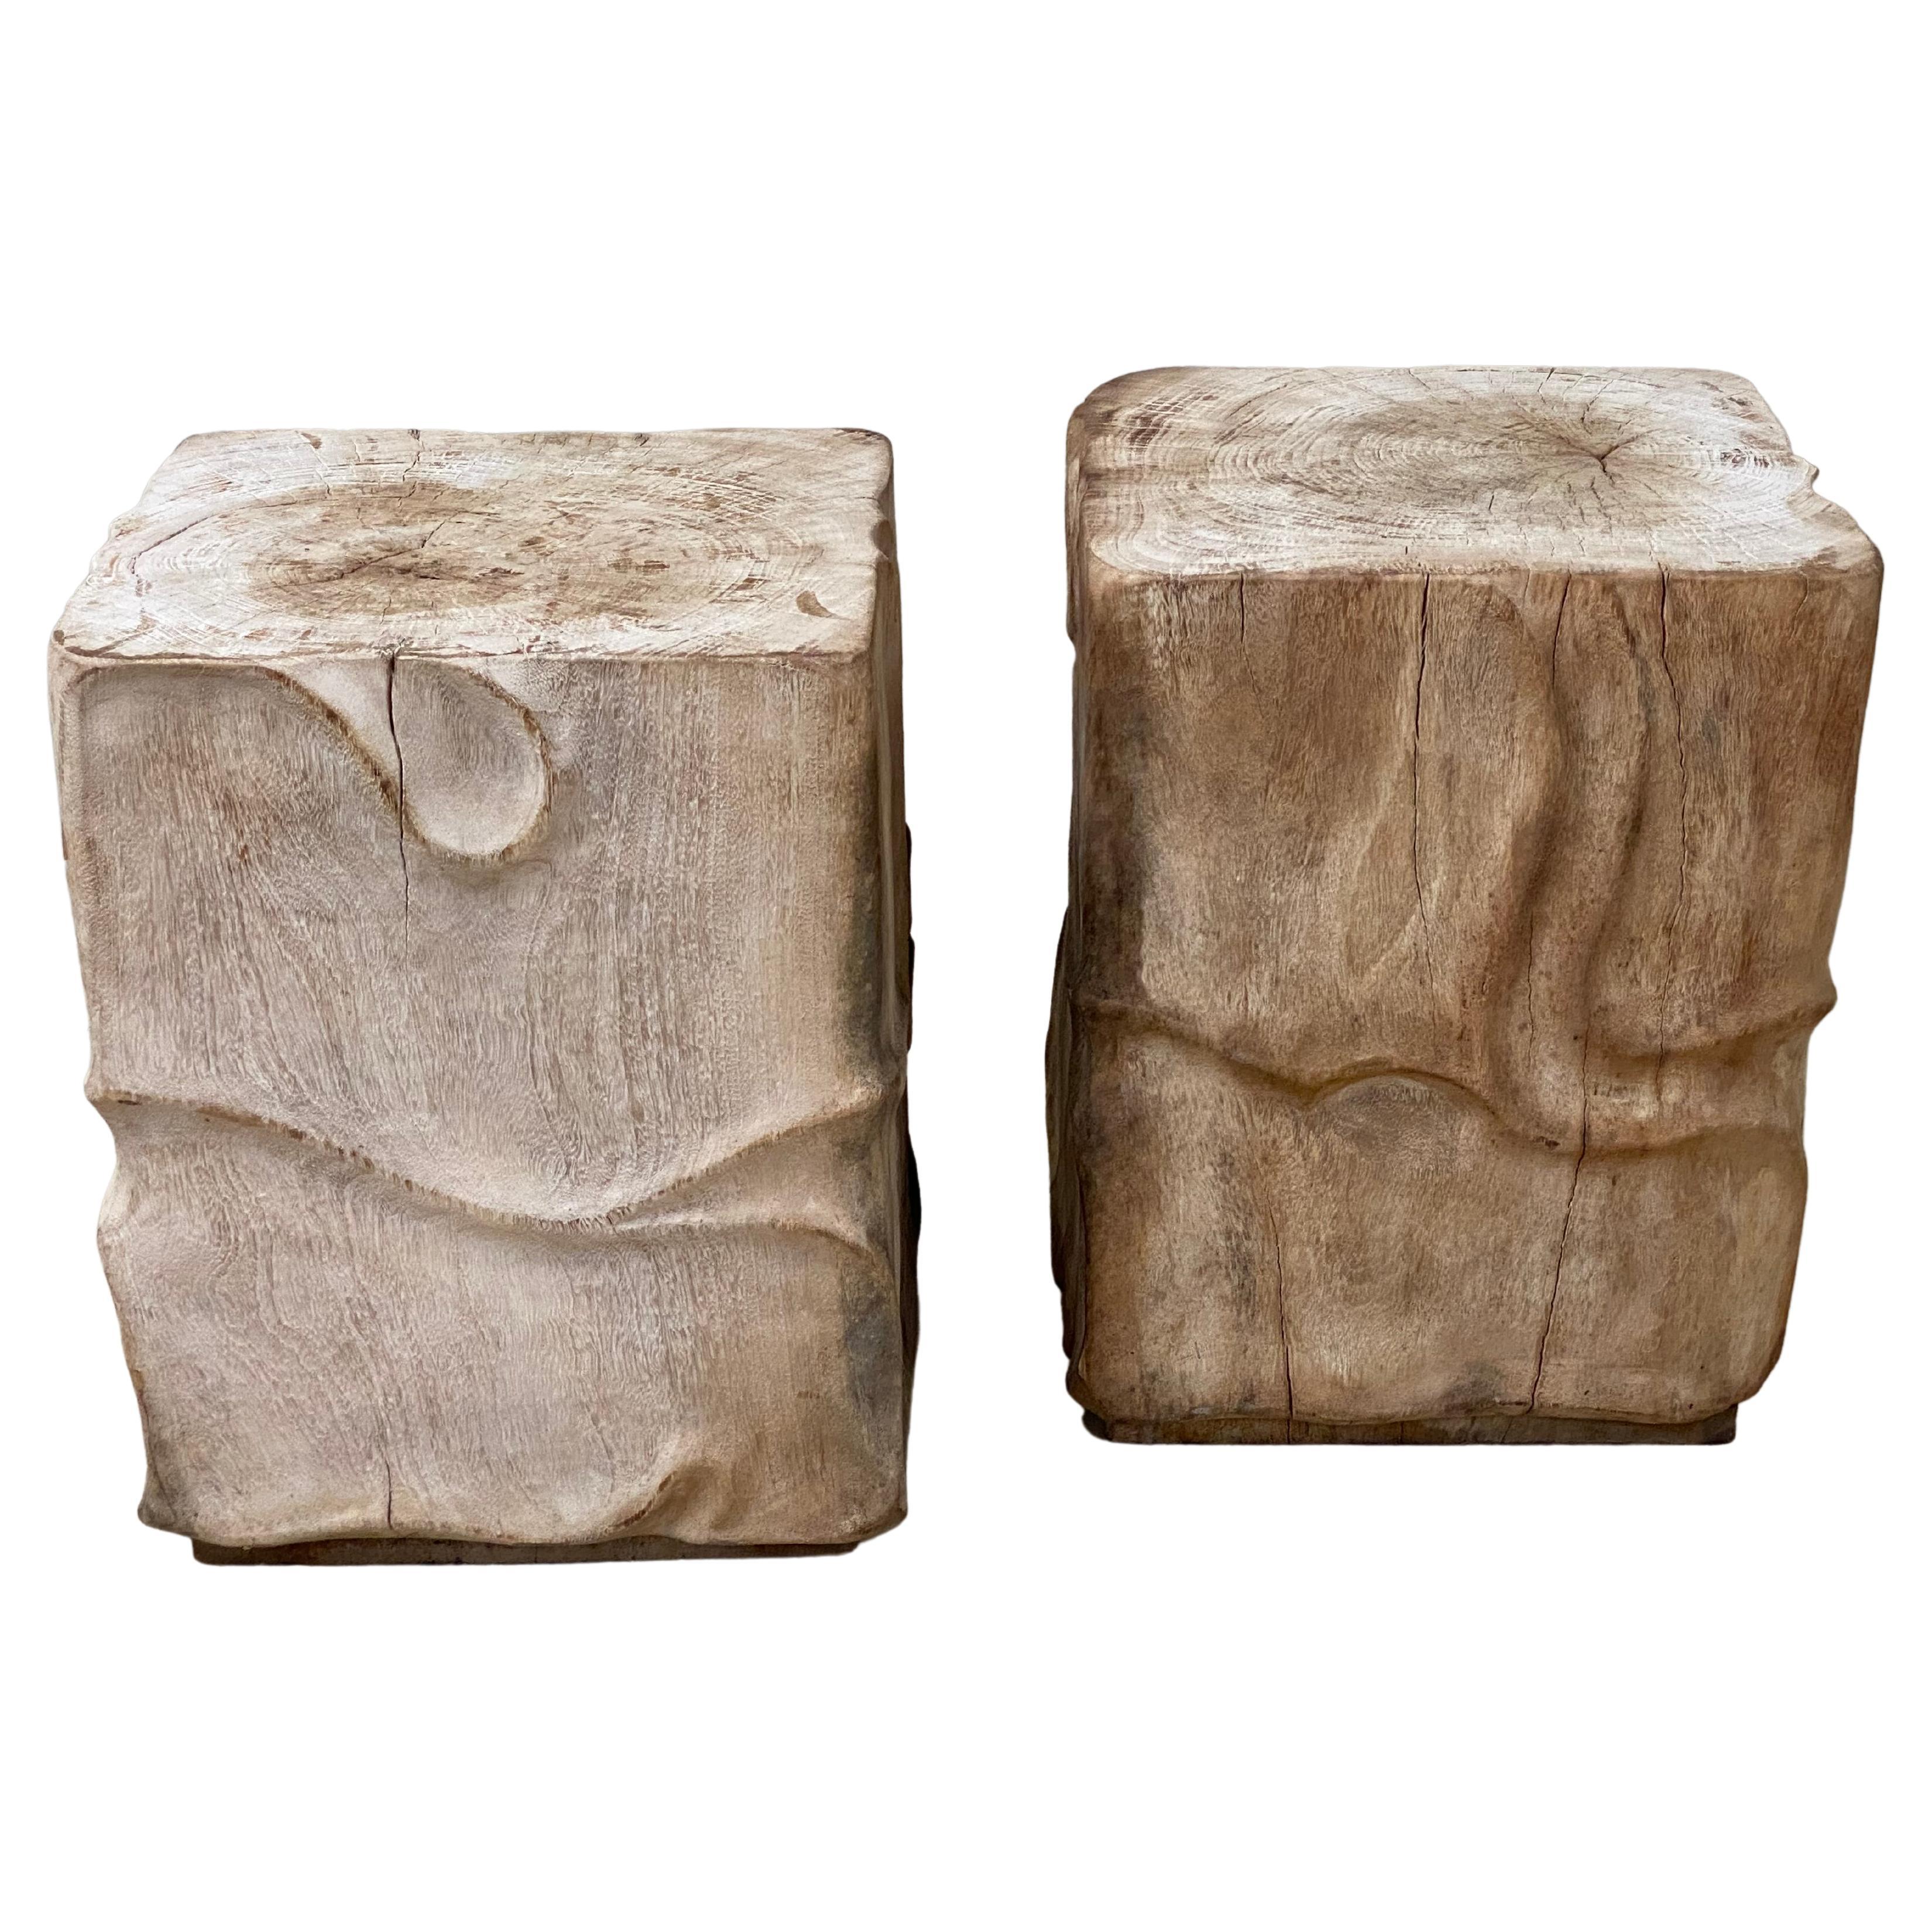 Pair of Wooden, Brutalist Side Side Tables - Rustic Wooden Stools.